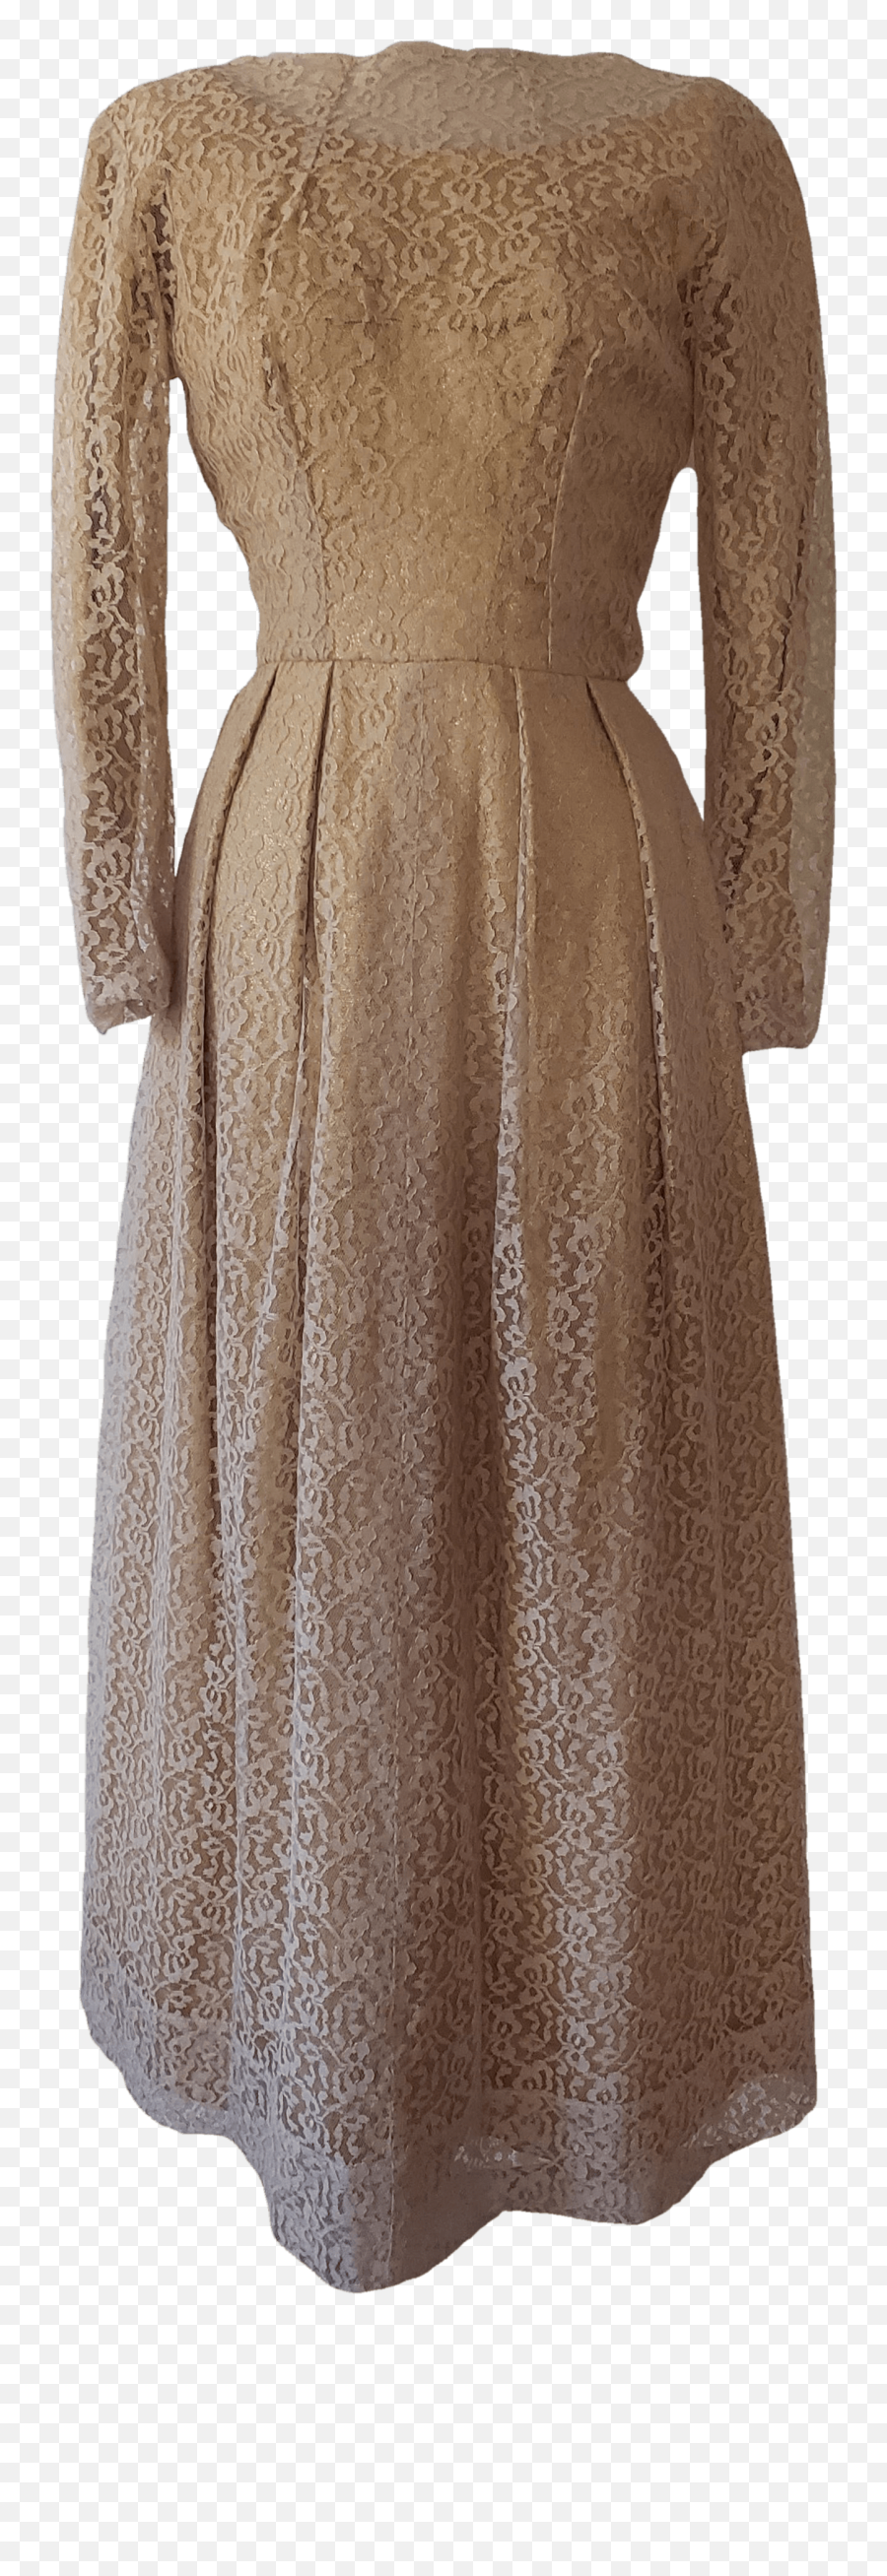 60u0027s Shiny Gold Dress With Tan Lace Overlay - Full Length Png,Gold Overlay Png